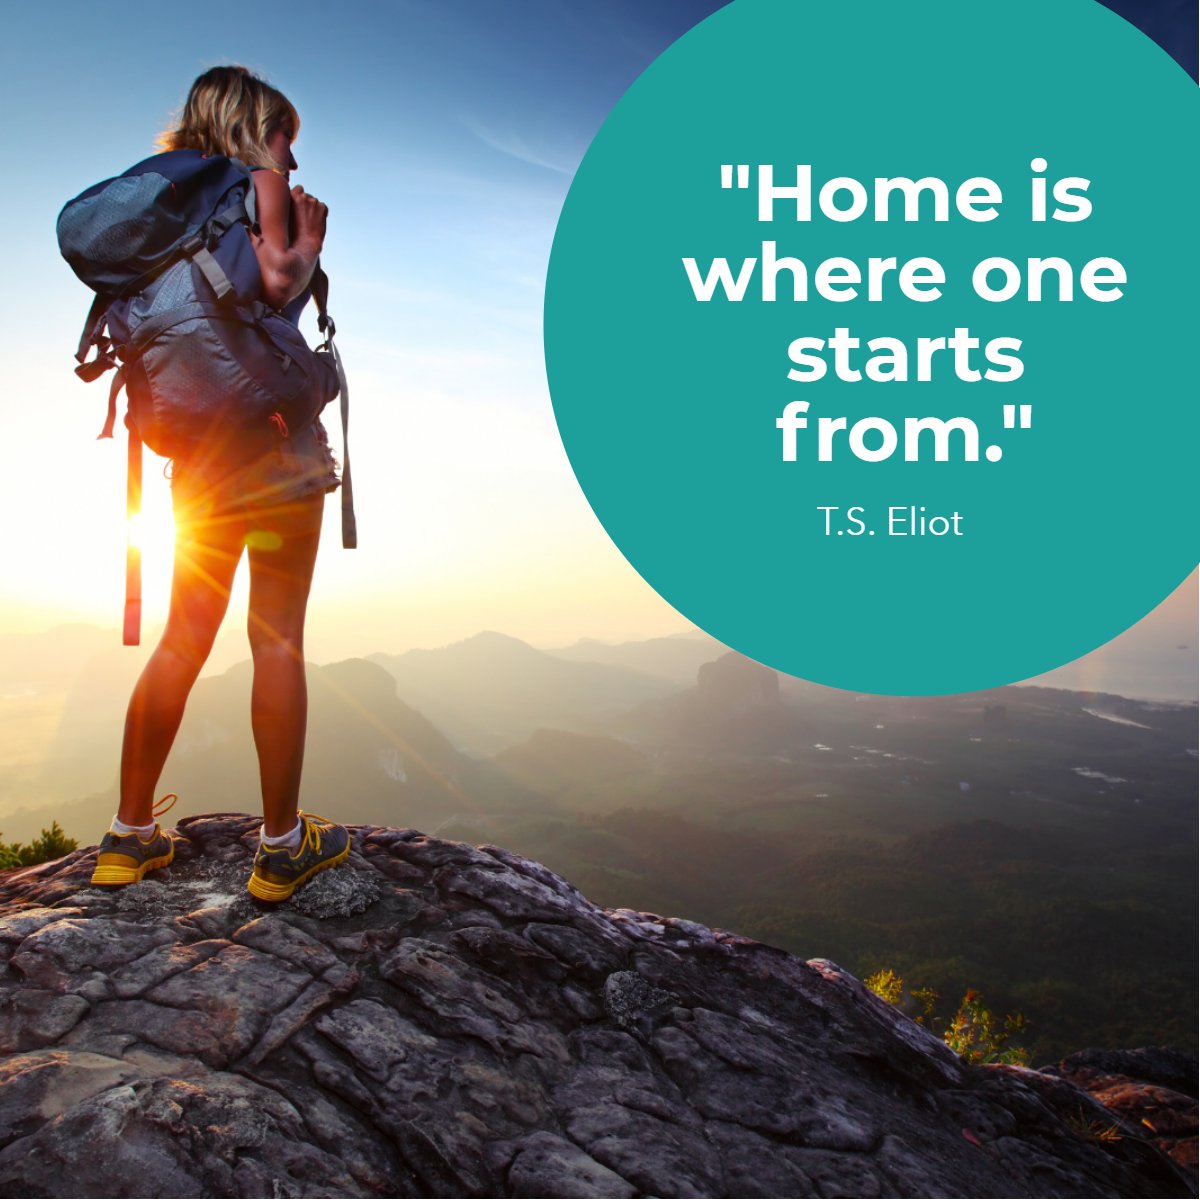 'Home is where one starts from.' 
― T.S. Eliot 📖

#quoteoftheday #goodquotes #tseliot #home #startpoint #realestate
 #chadwickknight #realtor #realestate #floridarealtor #floridarealestate #mvprealty #realestateadvisor #homesforsale #property #forsale #newhome